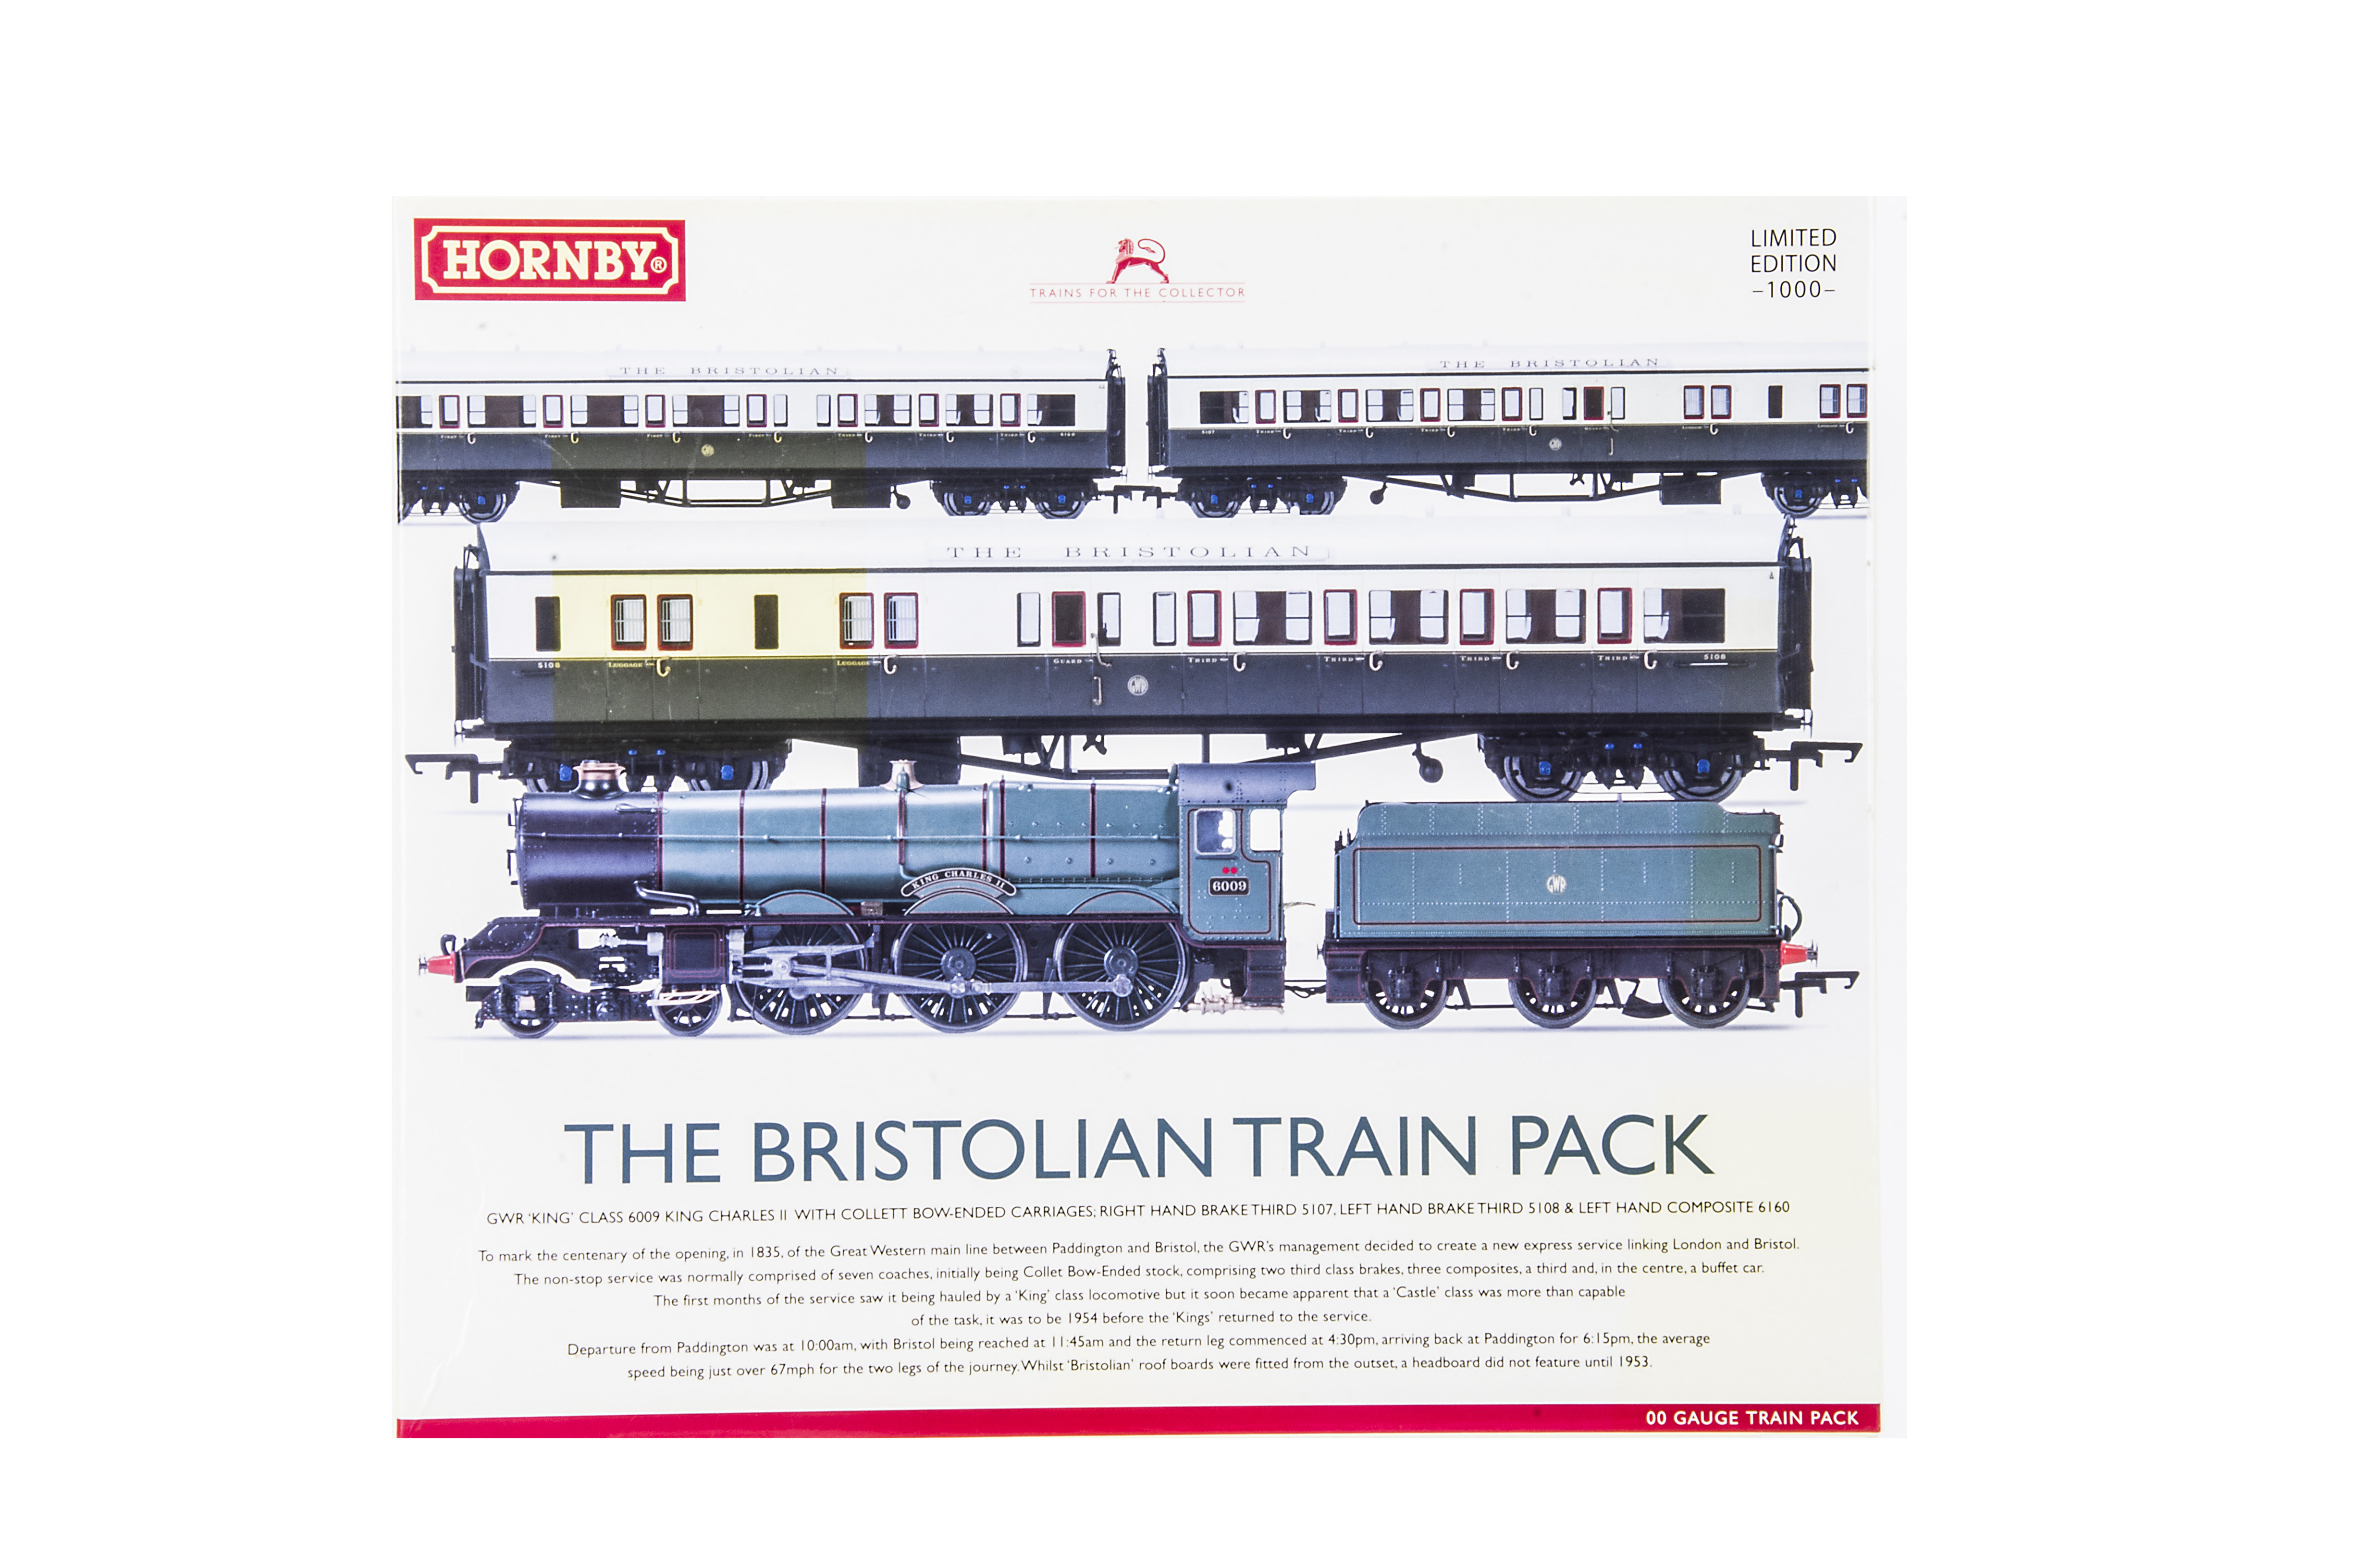 Hornby 00 Gauge Trains for the Collector R3401 The Bristolian Limited Edition Train Pack, comprising